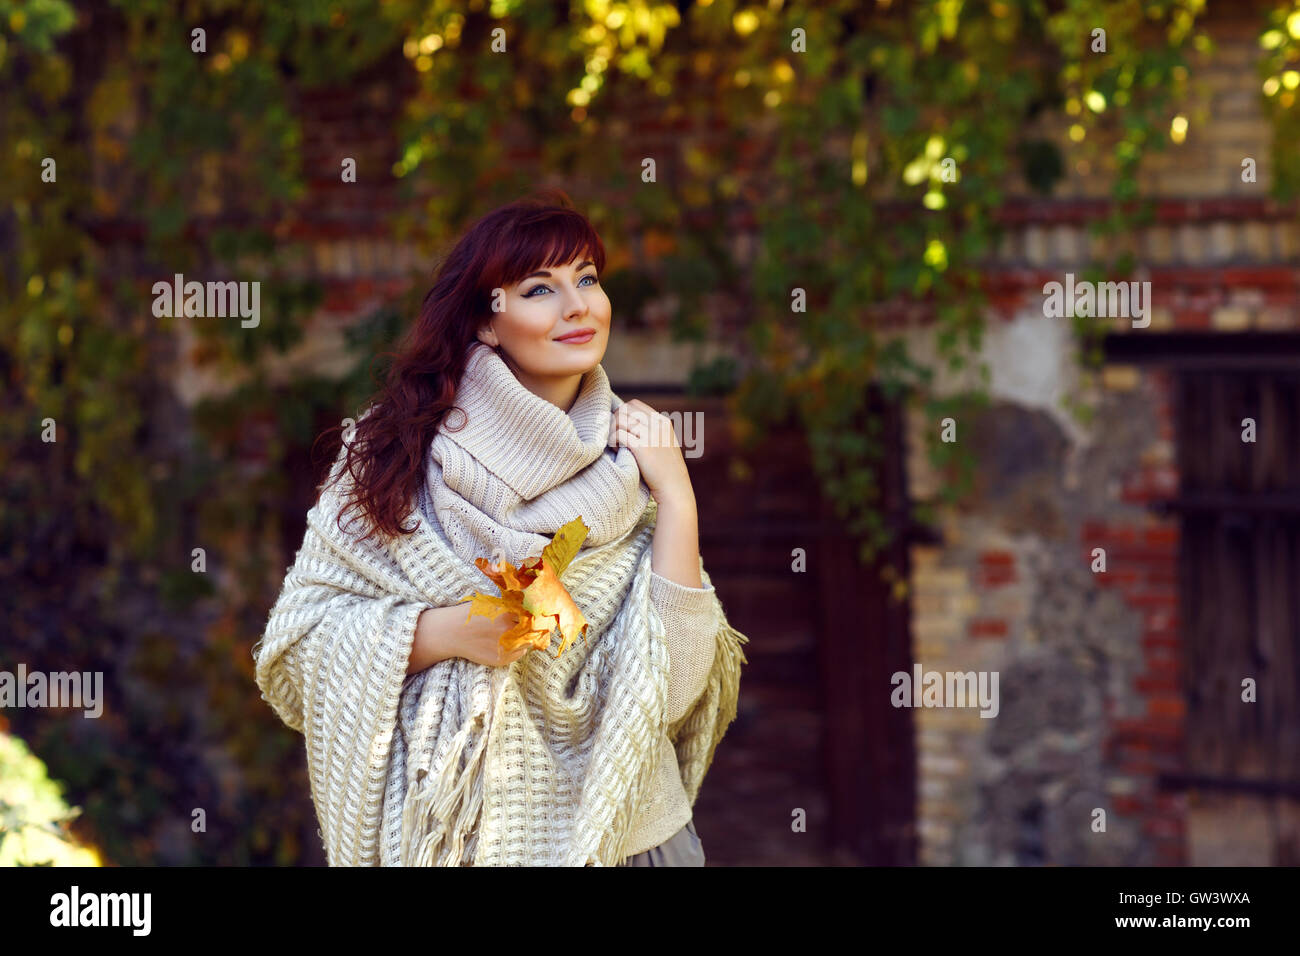 Beautiful girl outdoors with autumn leaves Stock Photo